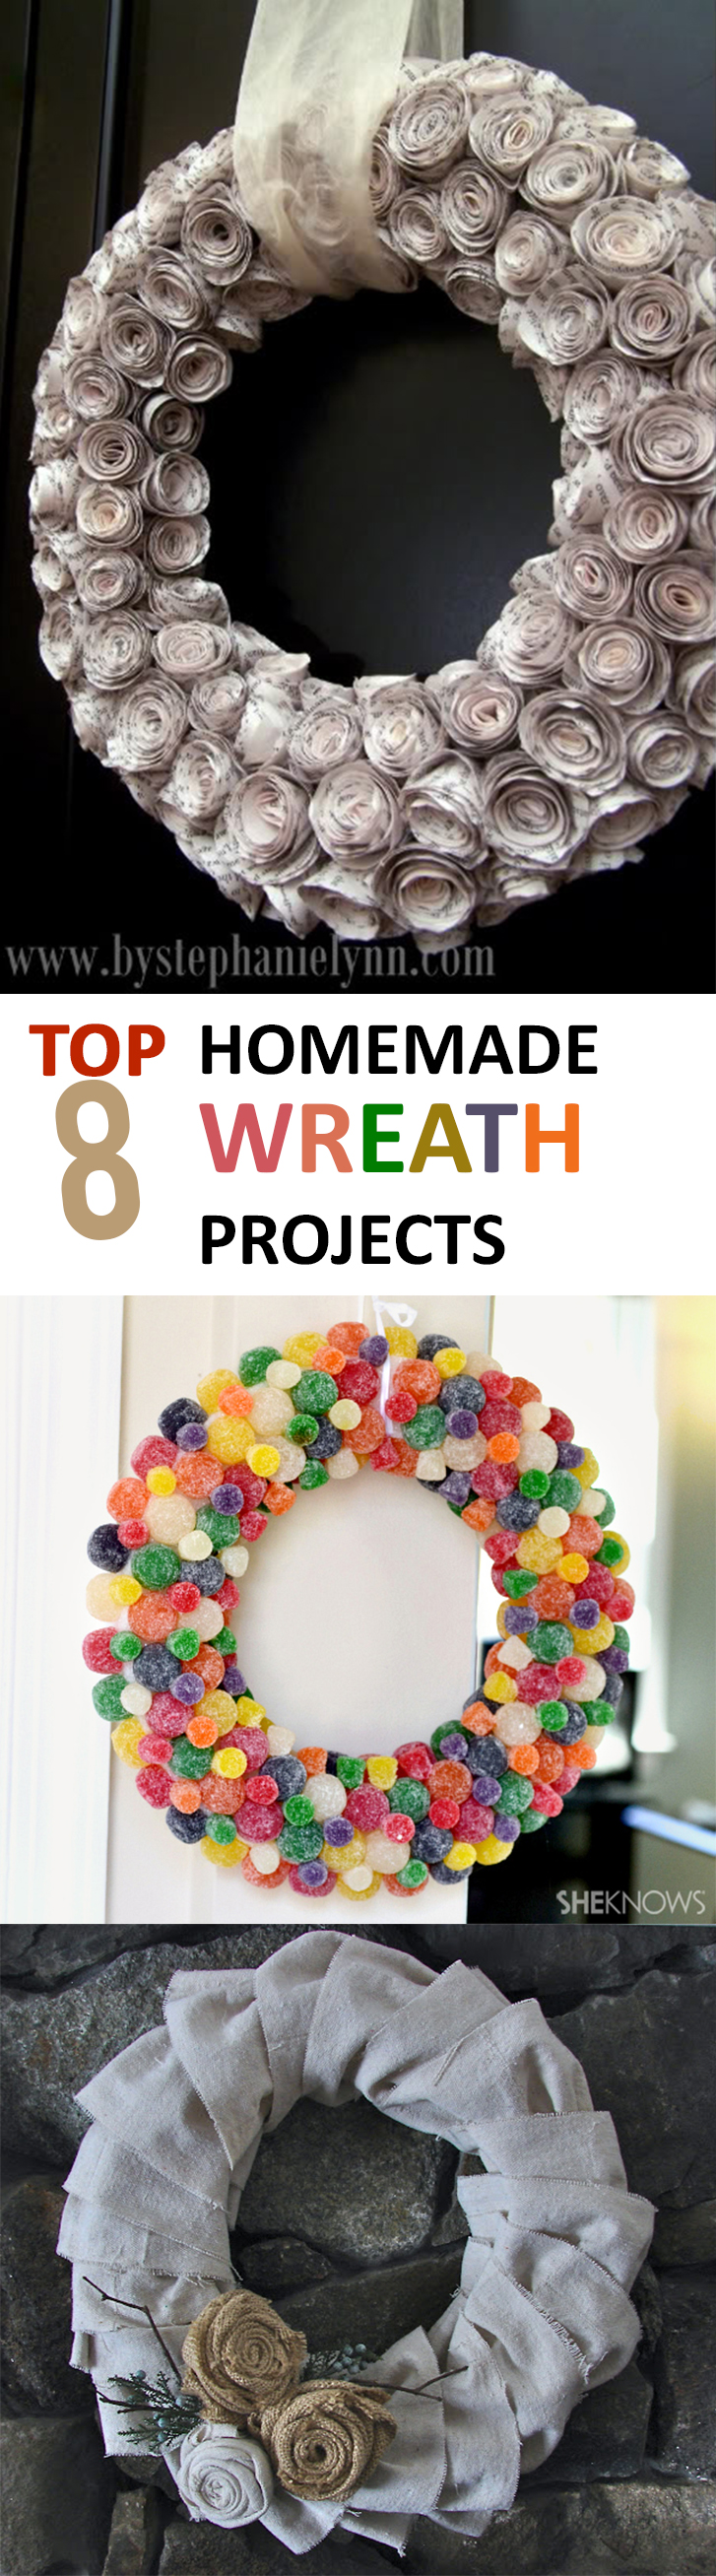 Top 8 Homemade Wreath Projects